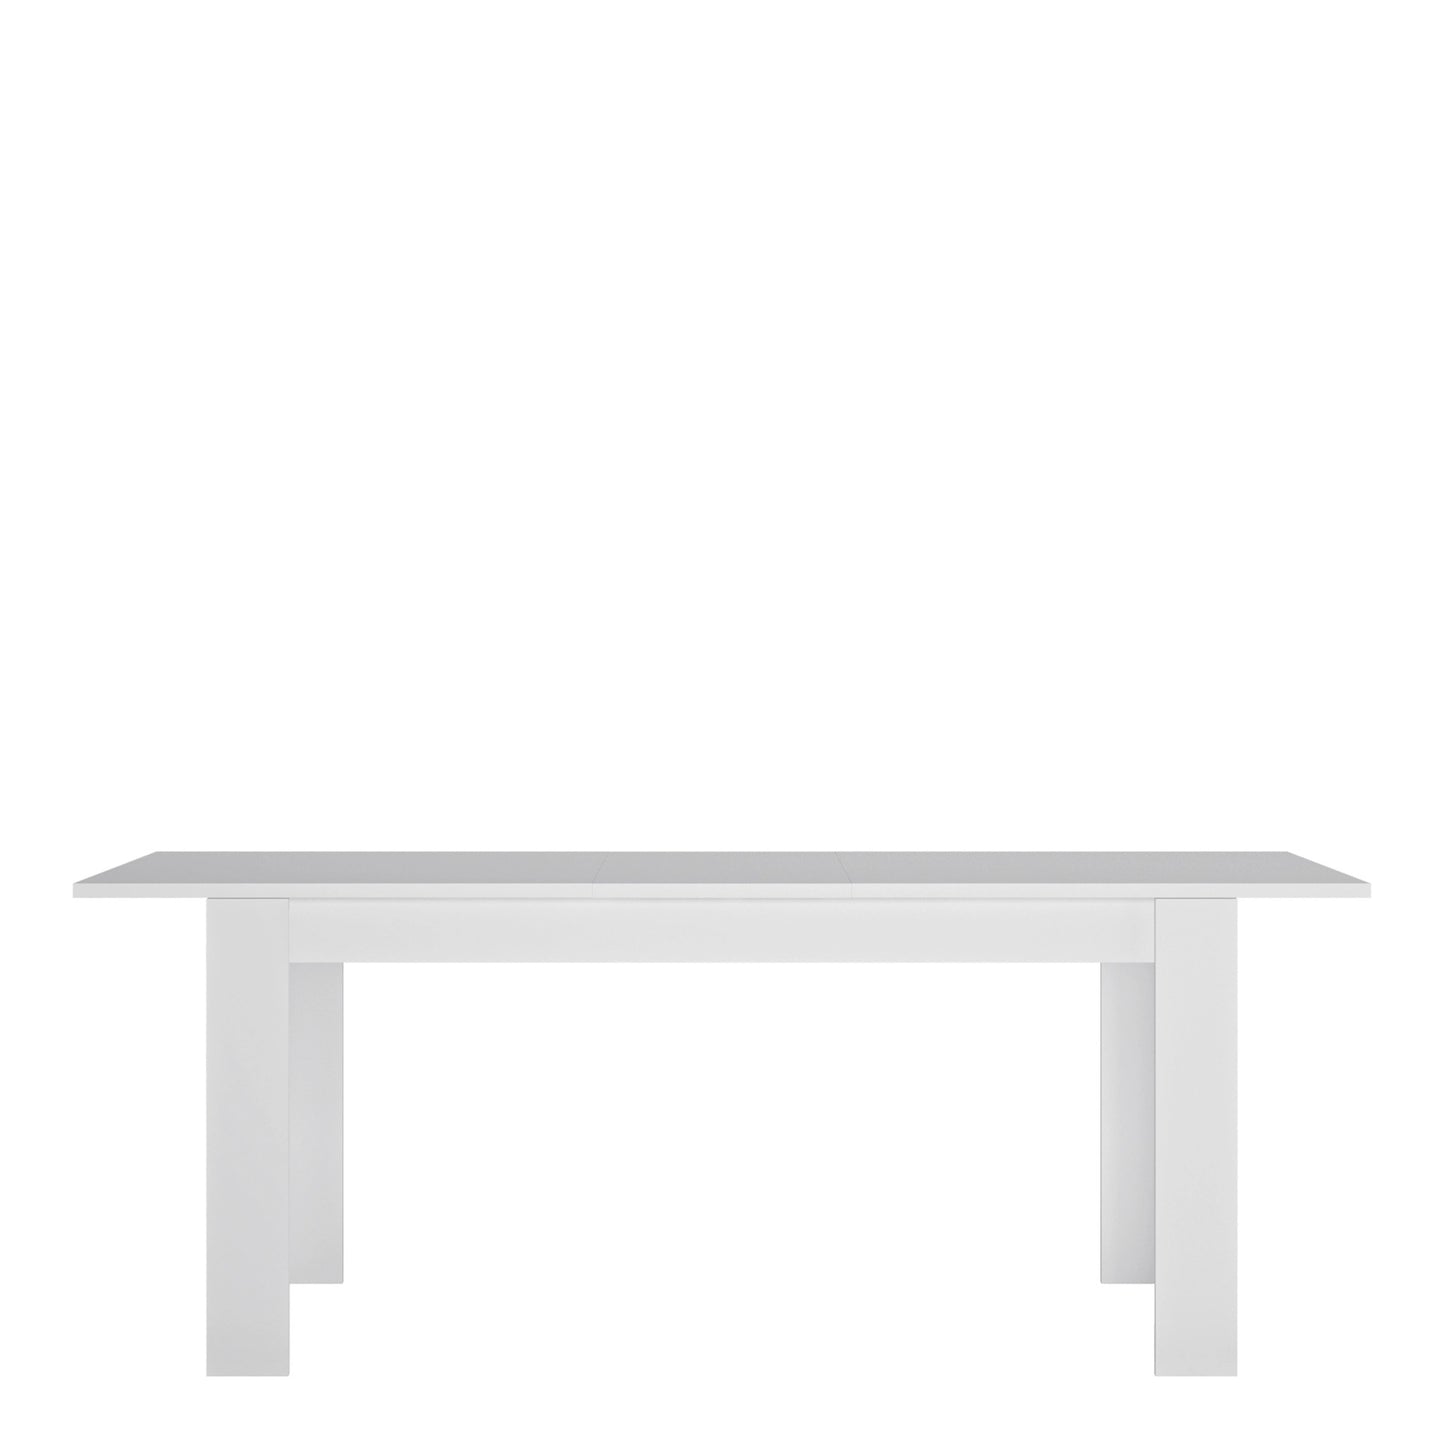 Furniture To Go Lyon Large Extending Dining Table 160/200cm in White & High Gloss